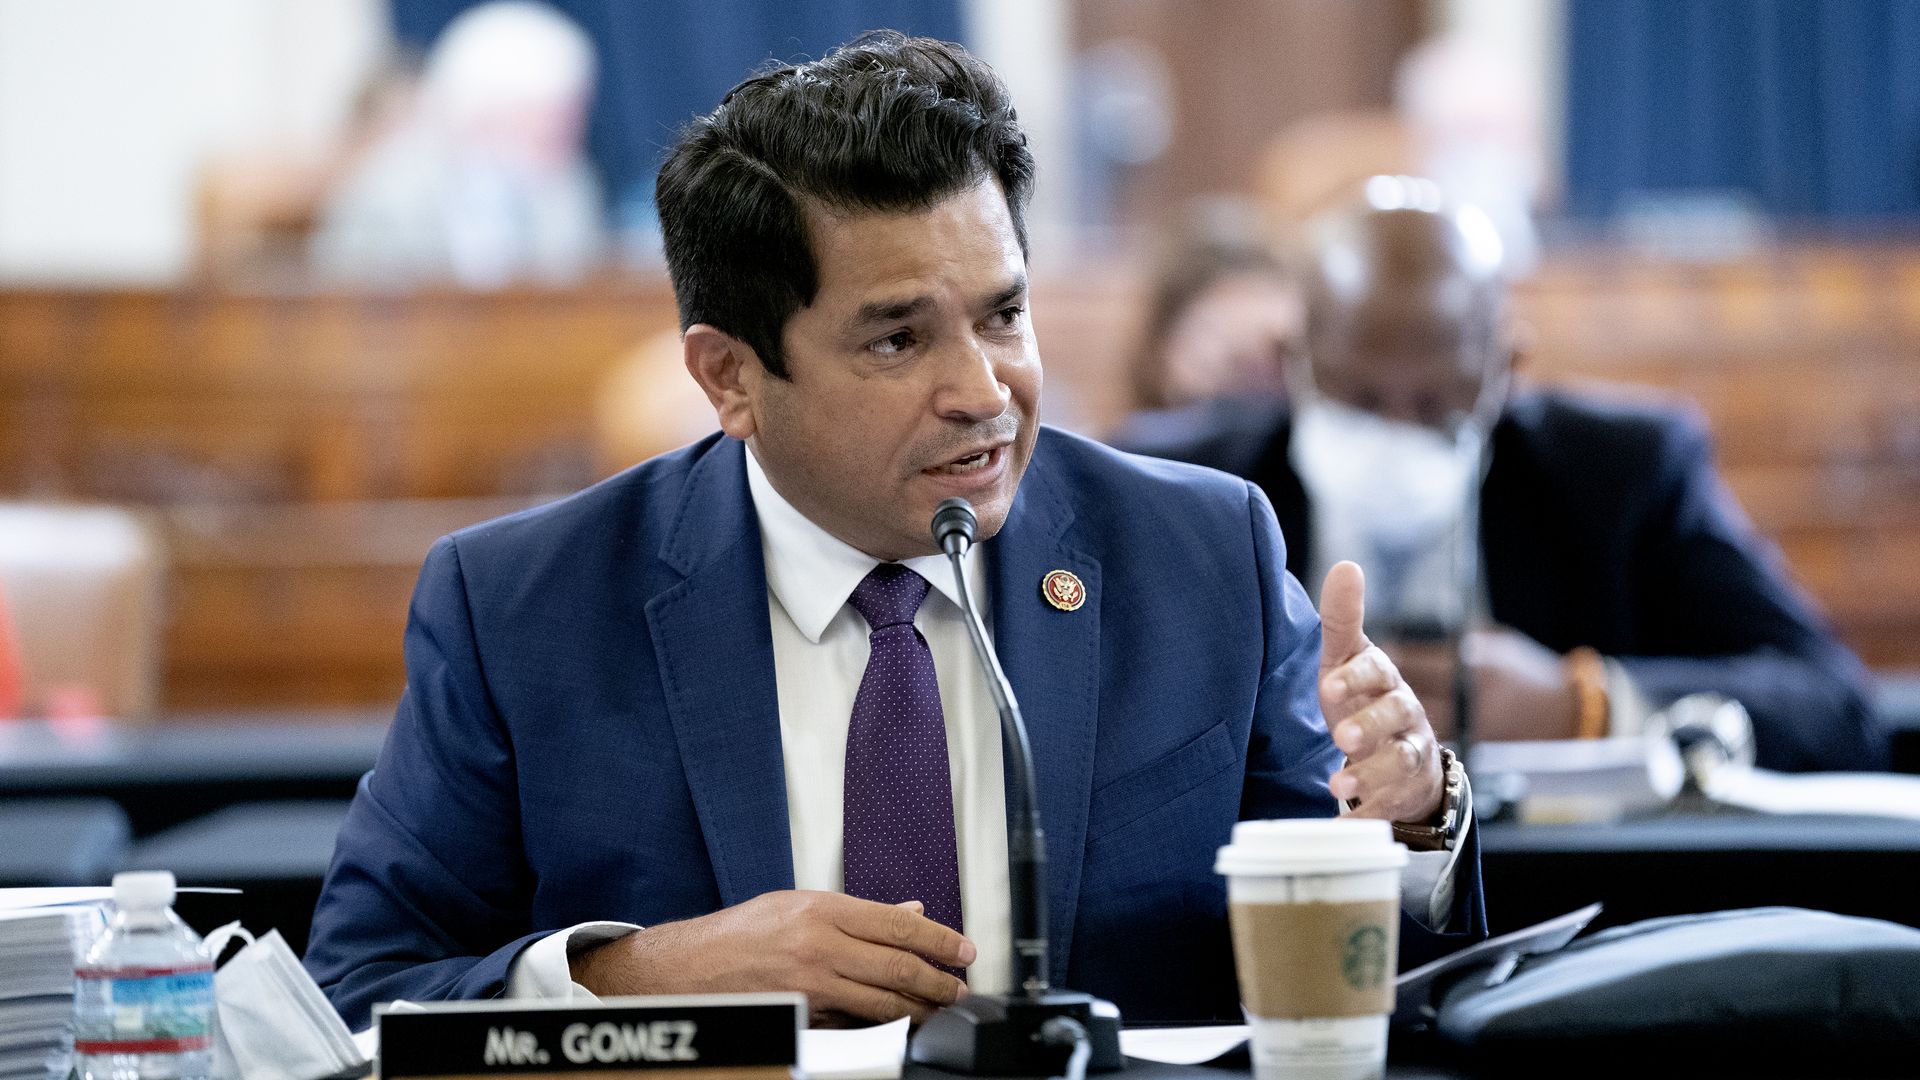 Rep. Jimmy Gomez is seen during a congressional hearing.